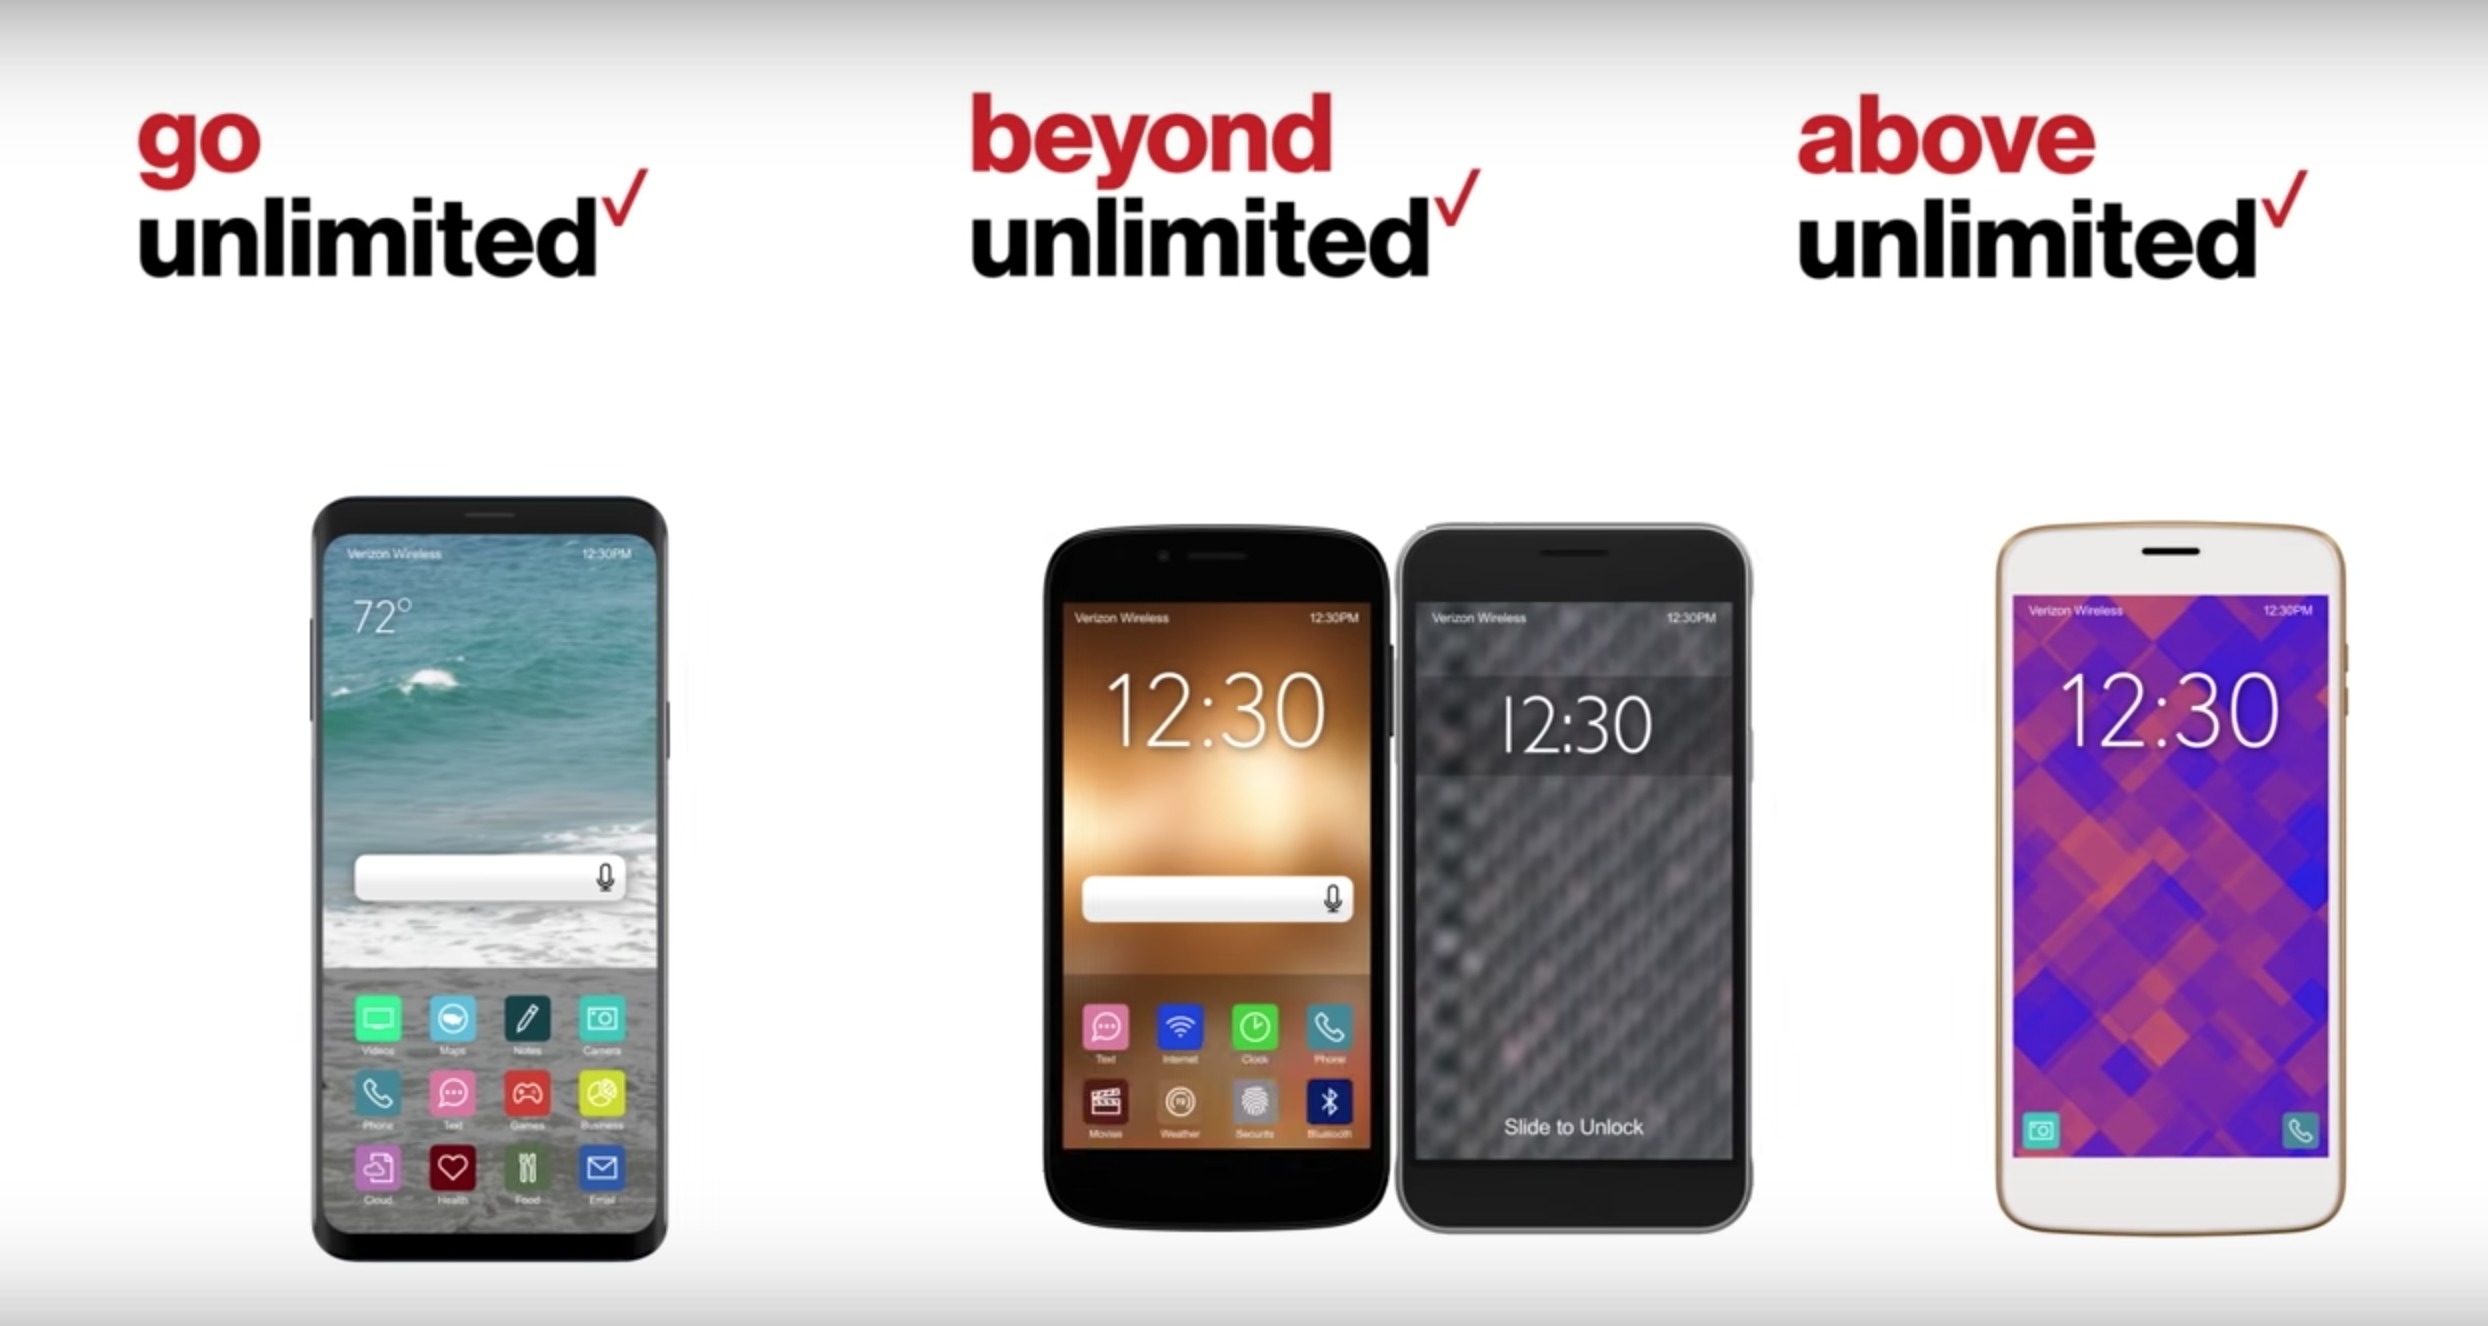 Verizon redefines what “unlimited” means yet again - Android Community